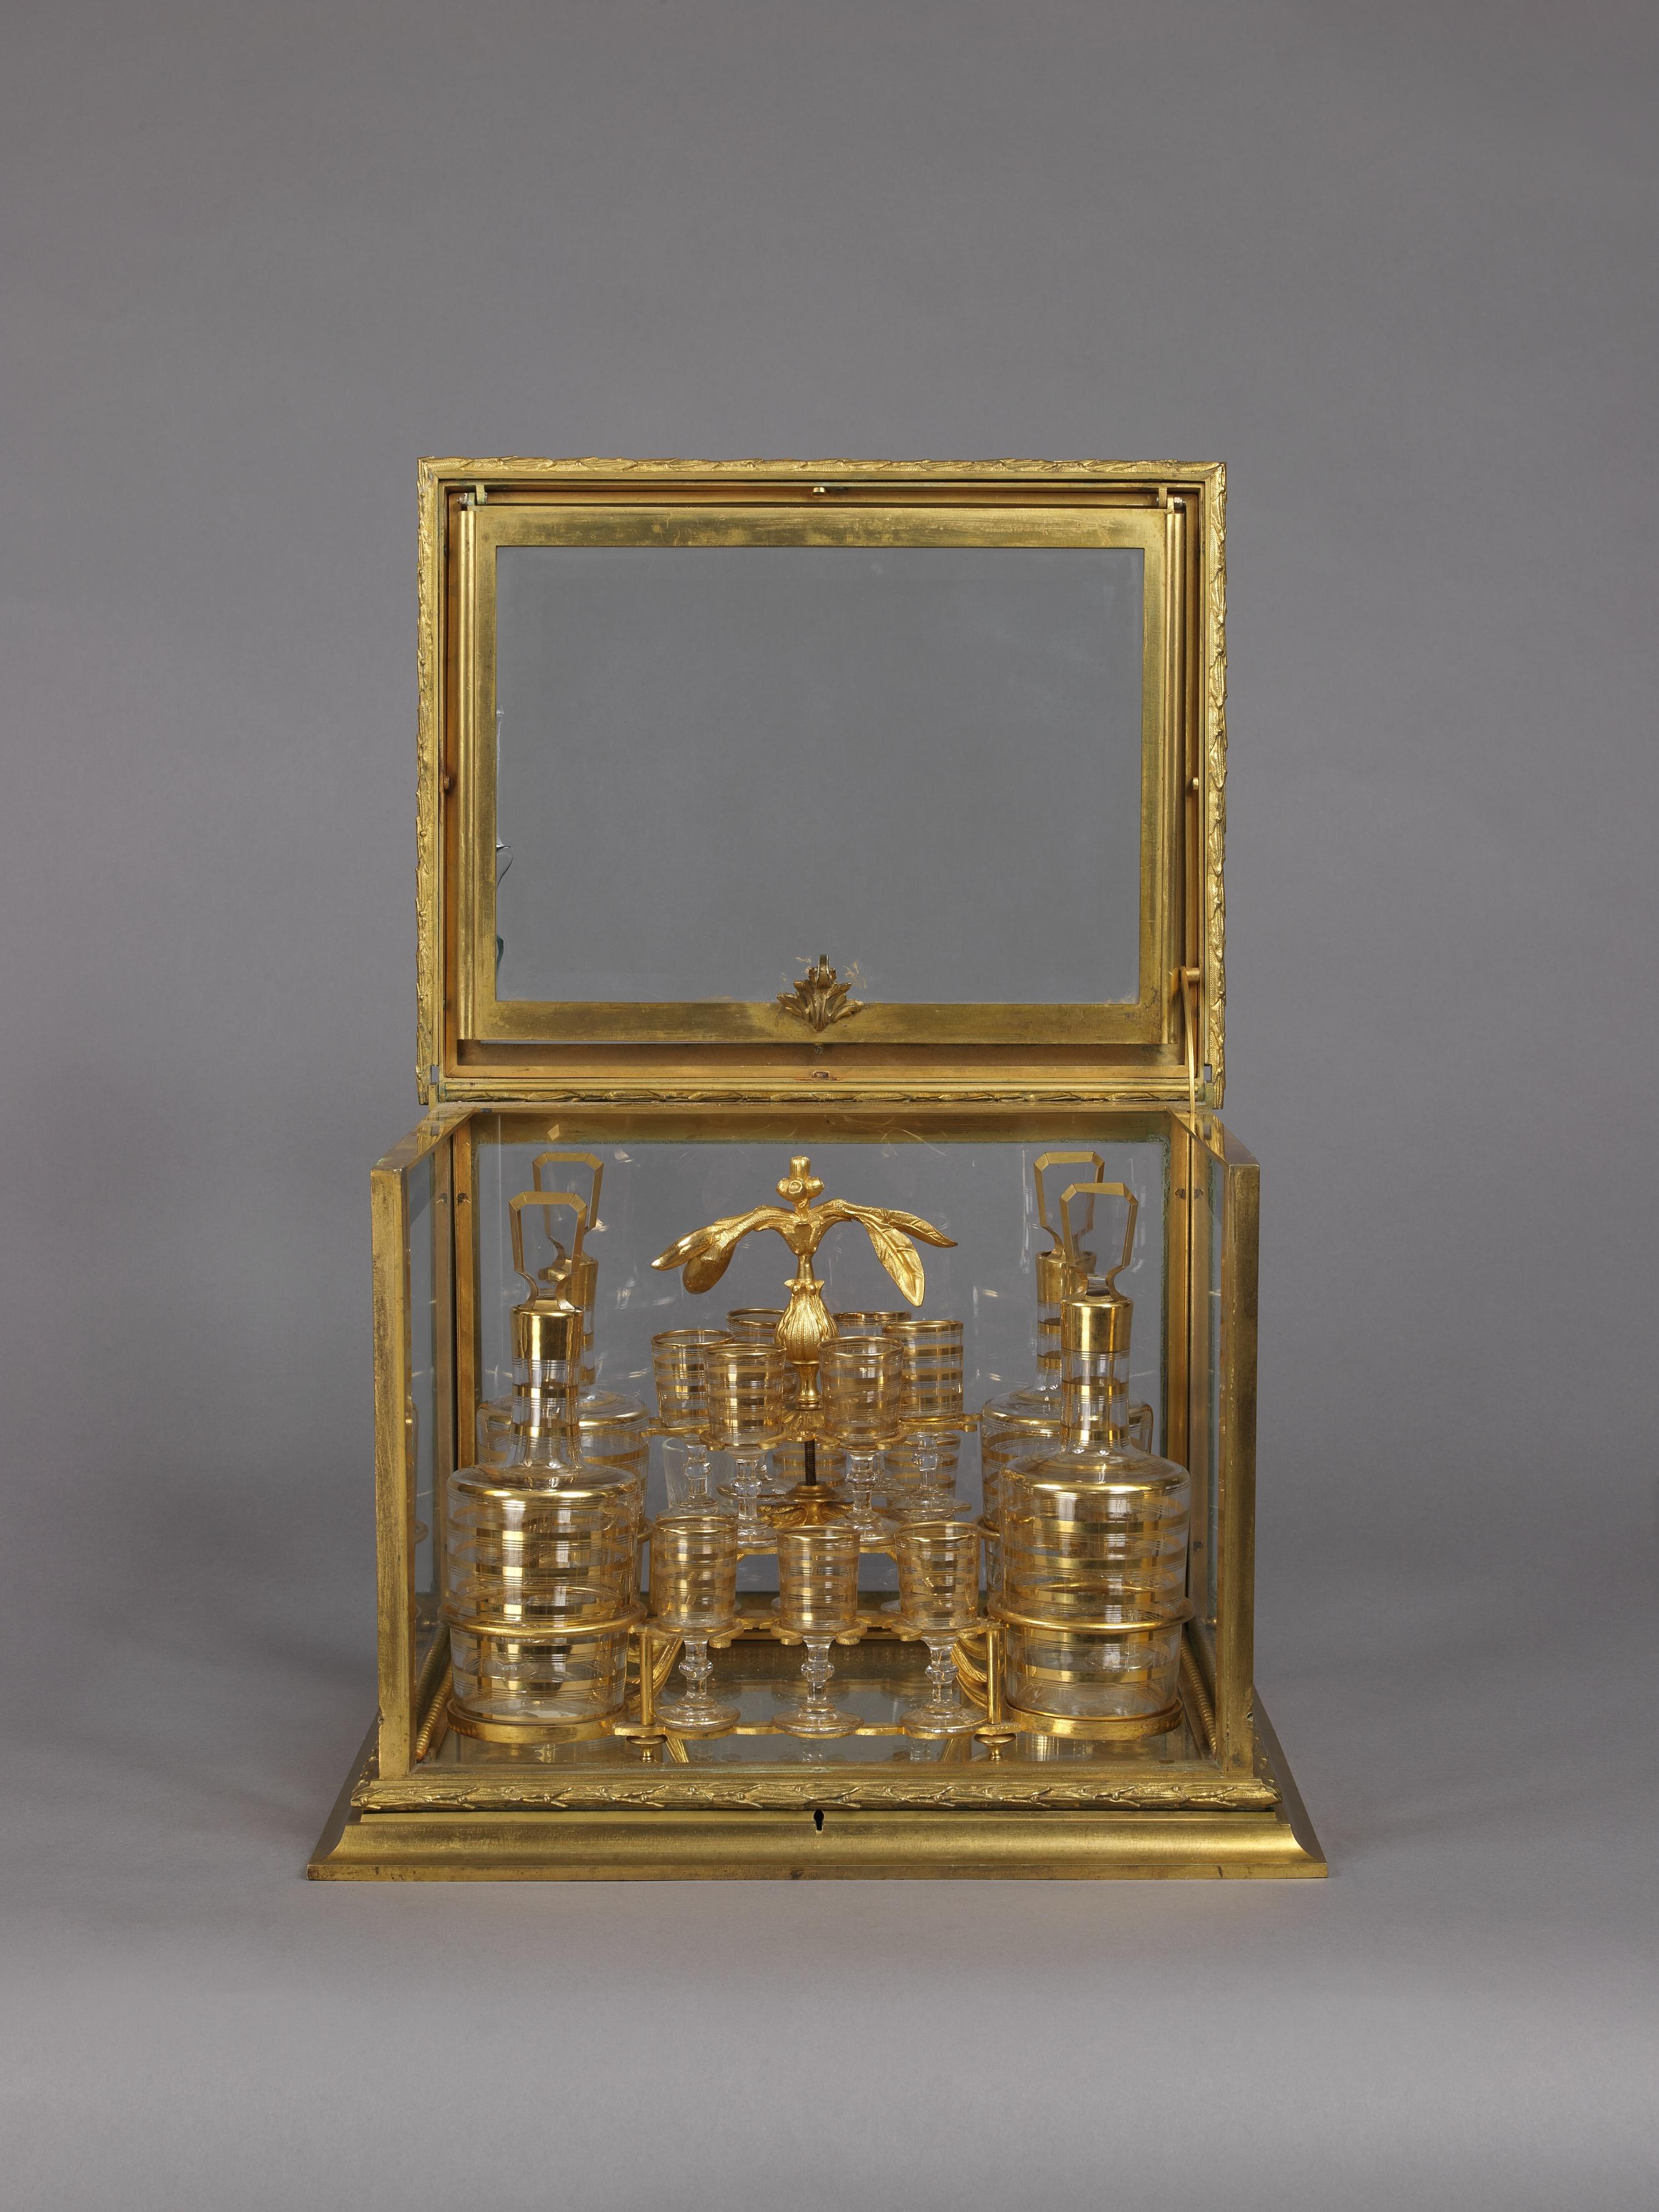 A fine and decorative gilt-bronze and cut-glass decanter set. 

French, circa 1890. 

This fine and decorative decanter set has a gilt-bronze box with glass panels and an 'up and over' lid enclosing sixteen small glasses and four decanters with